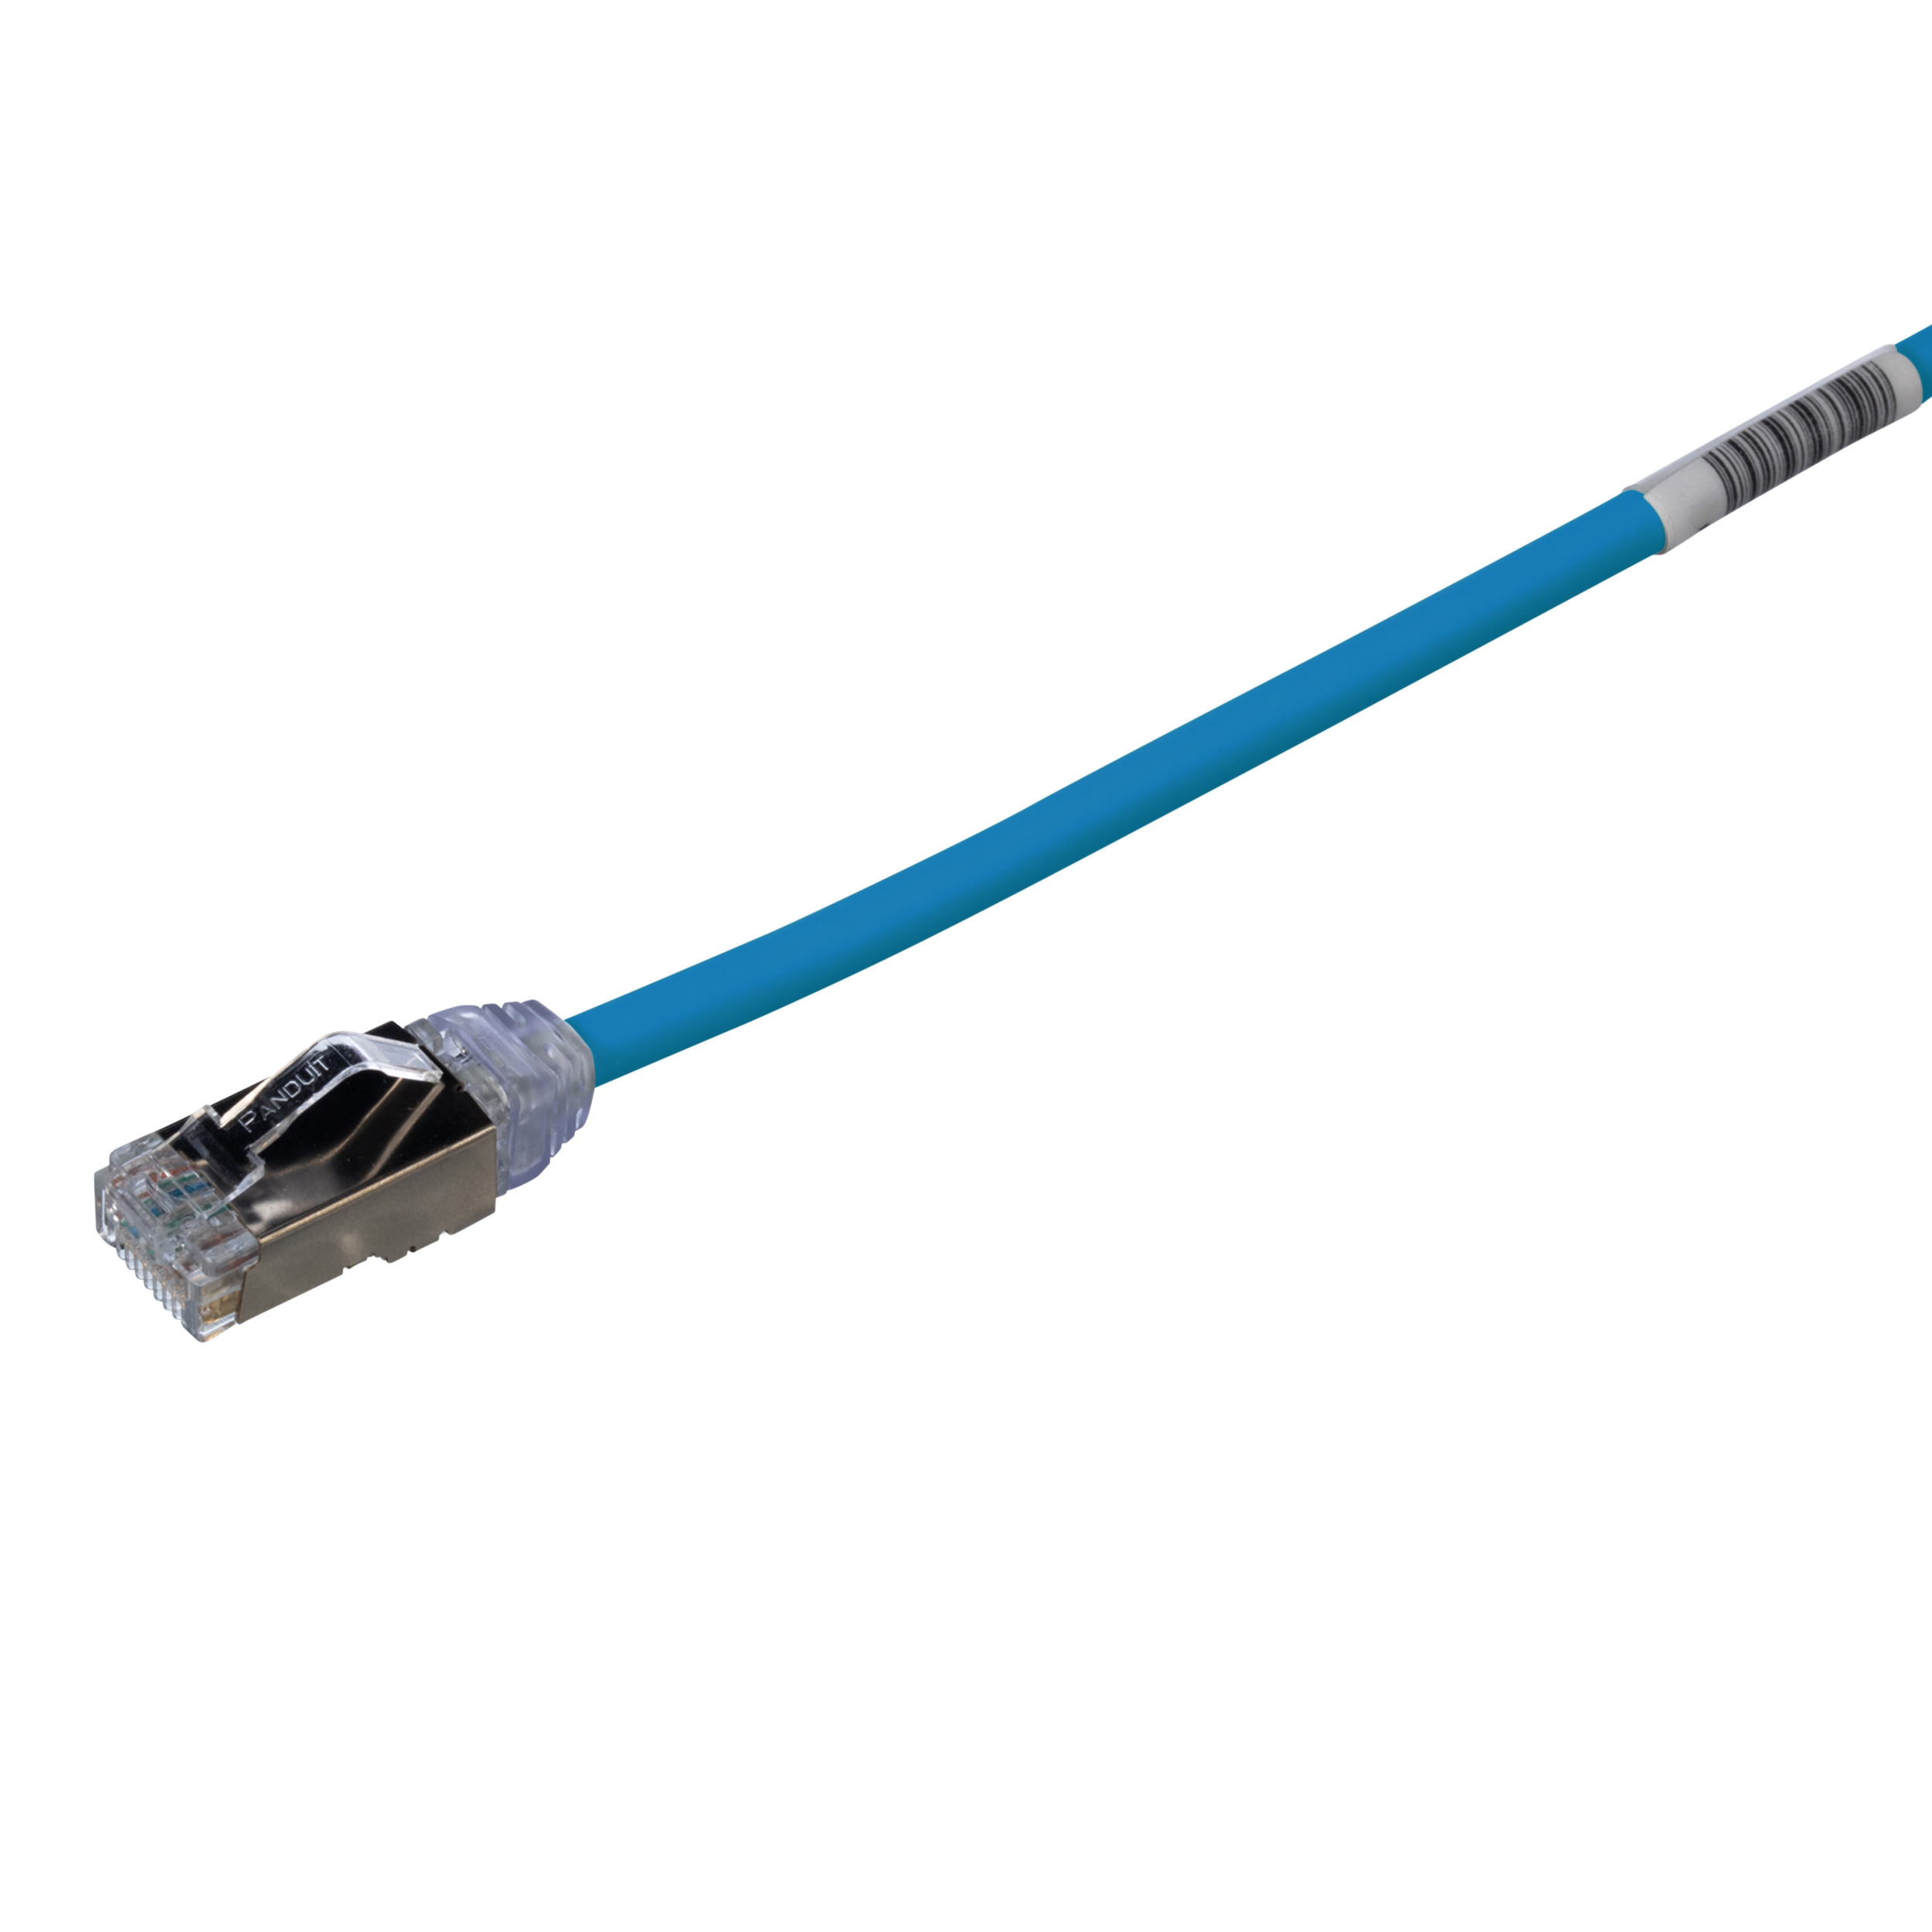 Cat 6A 28 AWG Shielded Patch Cord, 7 m, Blue